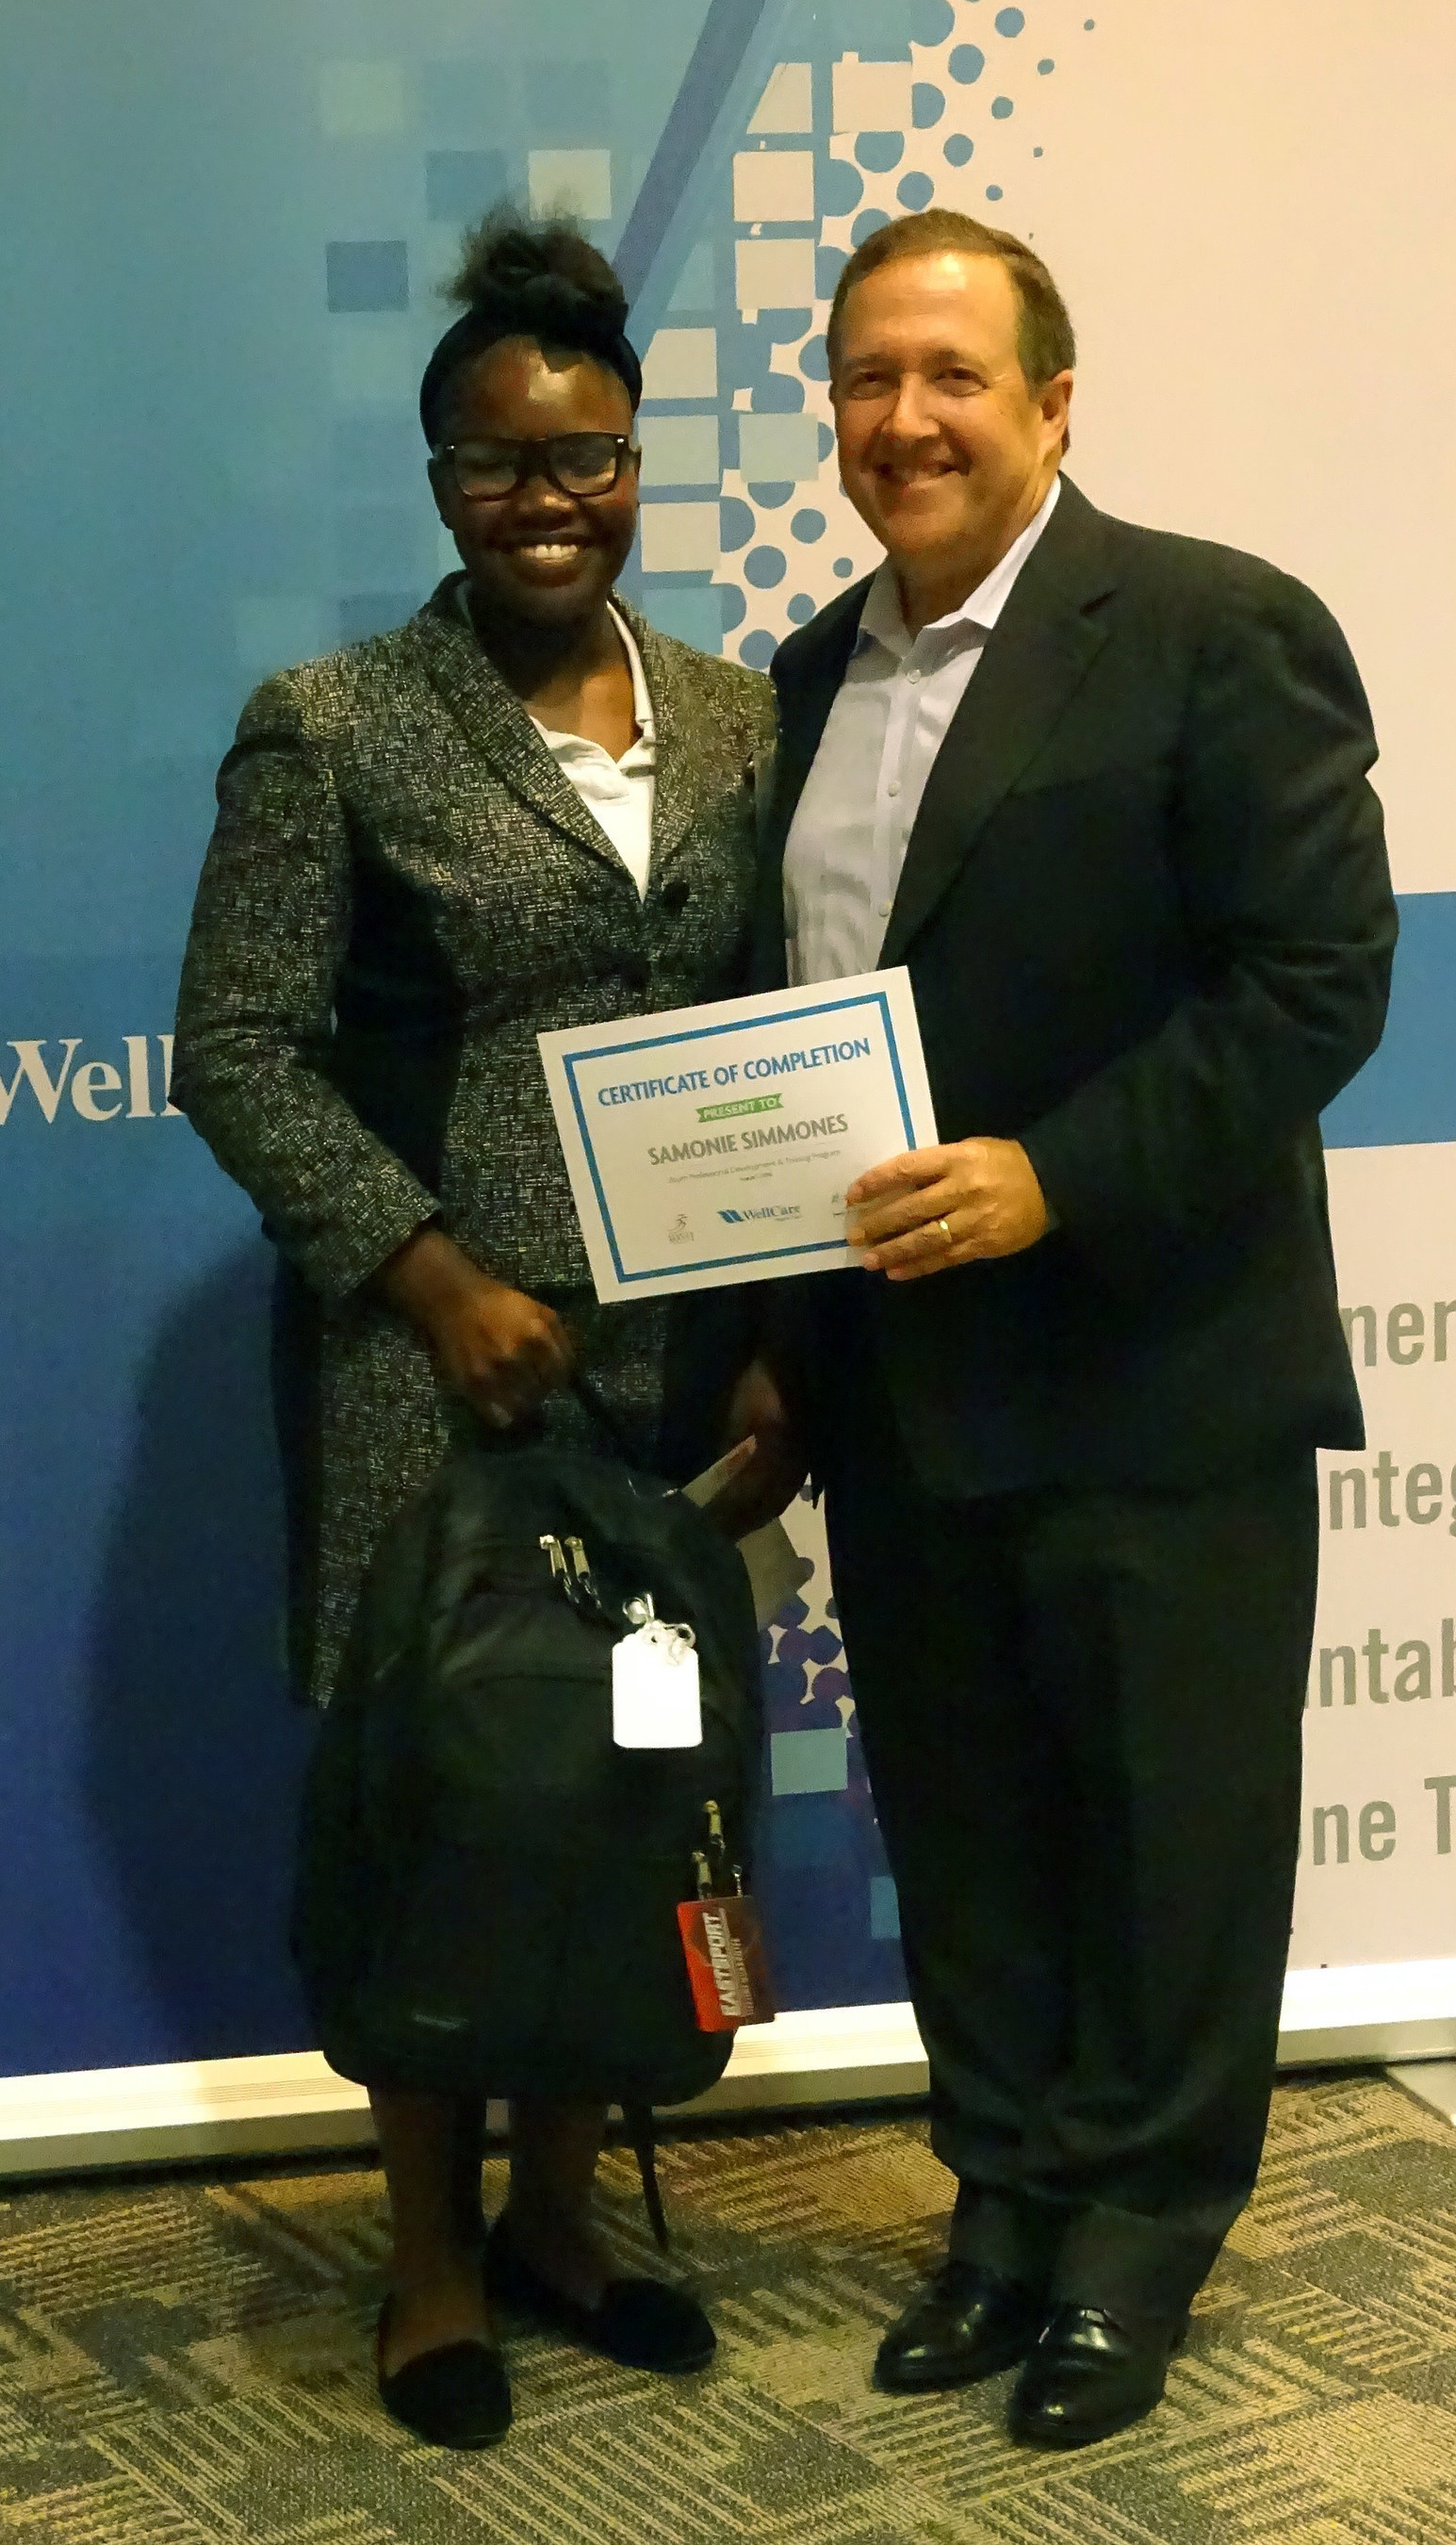 On Aug. 1, 16-year-old Samonie Simmons accepts her graduation certificate from WellCare CEO Ken Burdick.